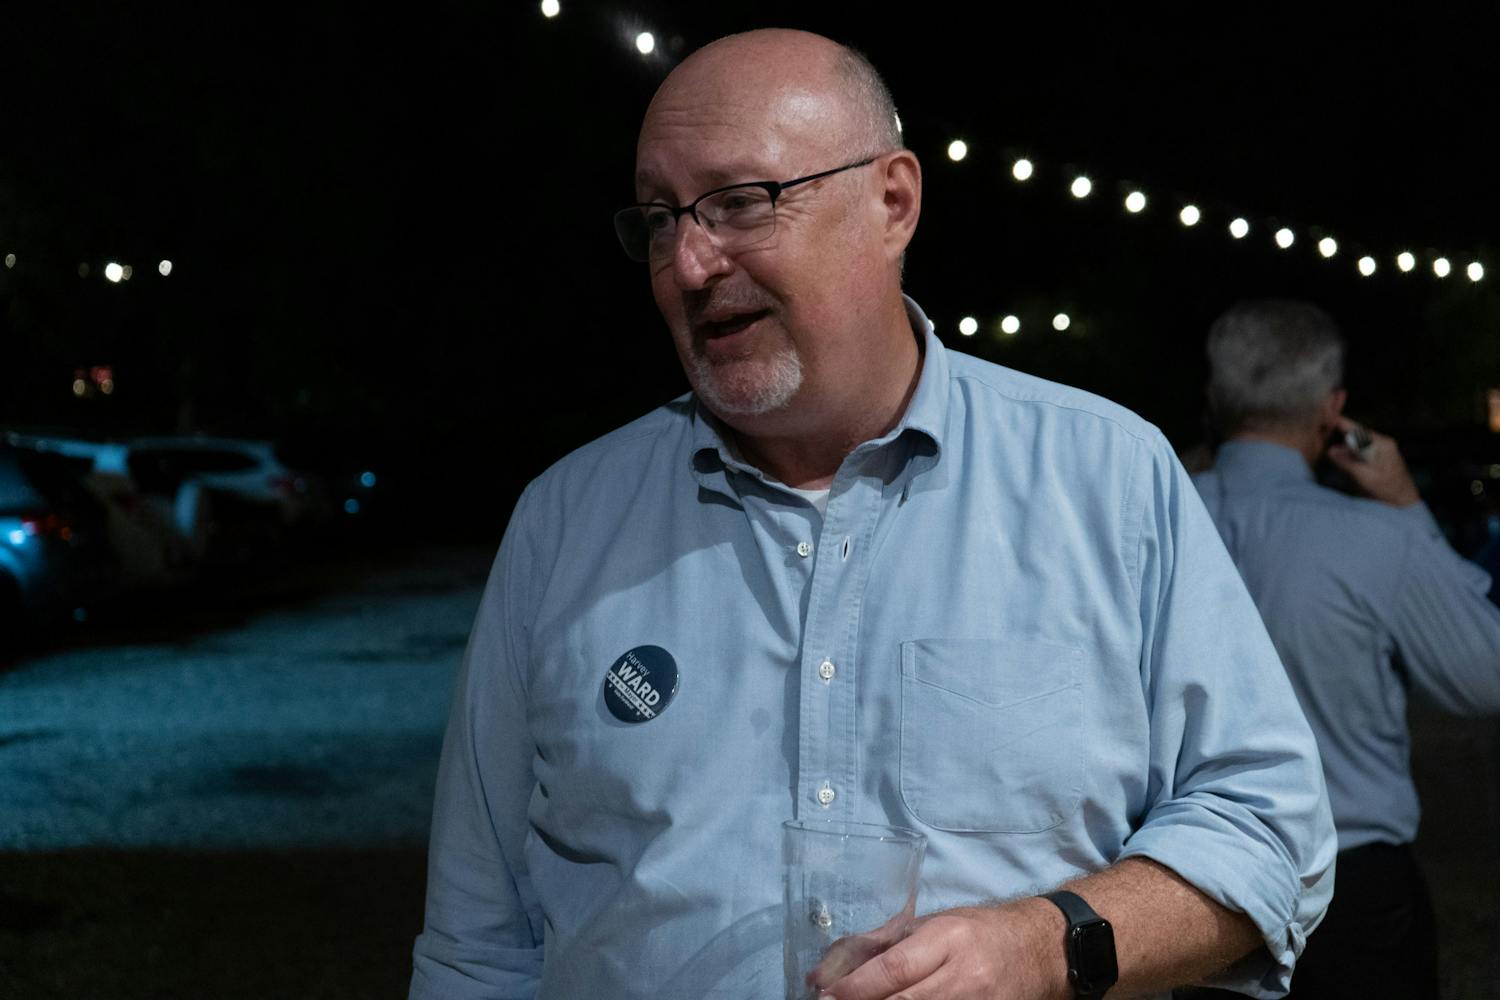 Harvey Ward, a candidate for Gainesville mayor, attends election watch party with supporters at
Cypress & Grove Brewing Company Tuesday, August 23, 2022.